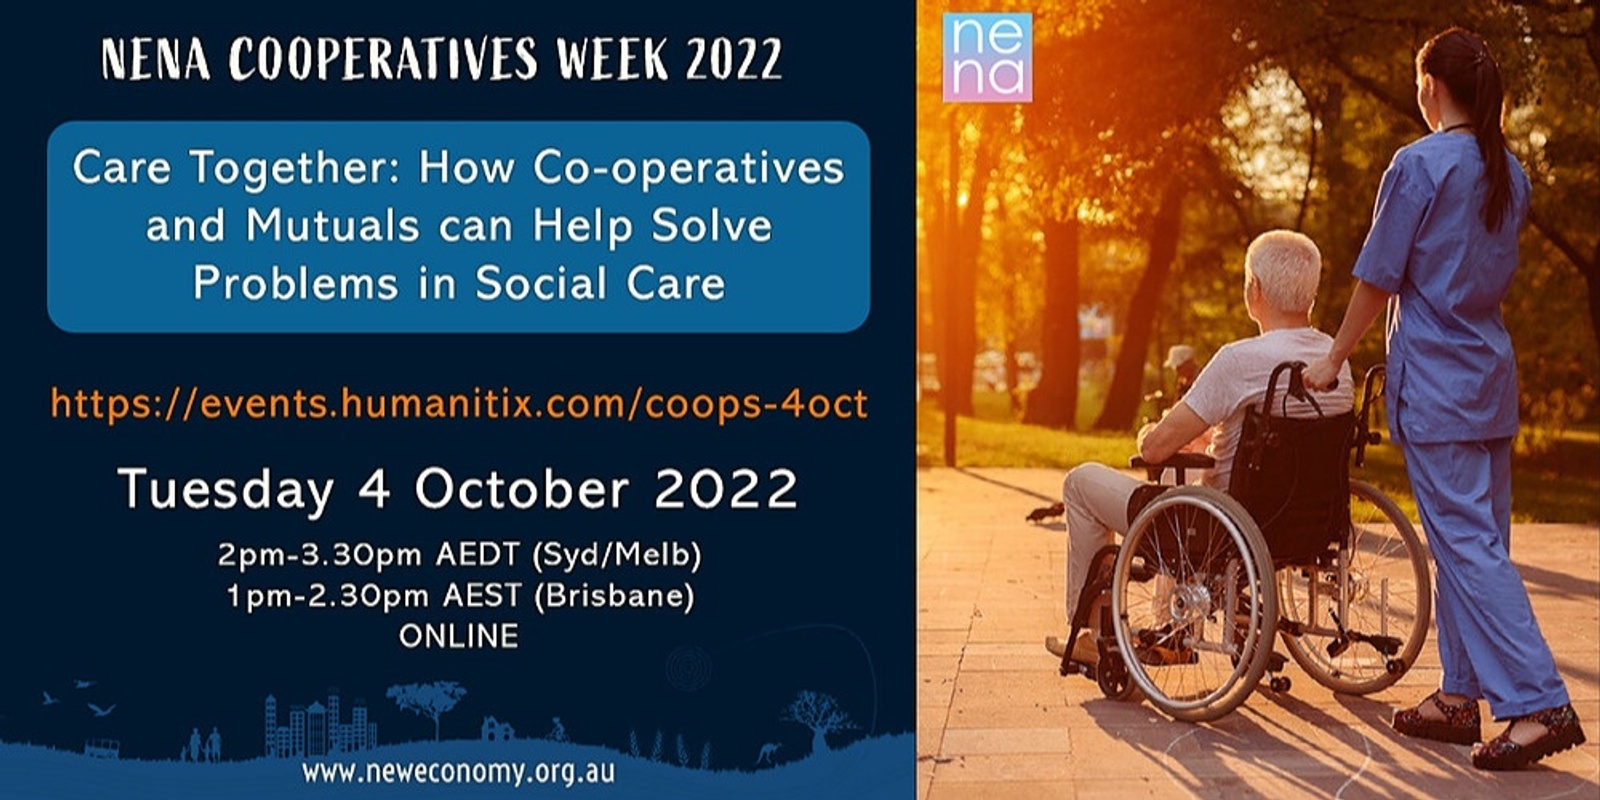 Care Together: How Co-operatives and Mutuals can help solve problems in social care